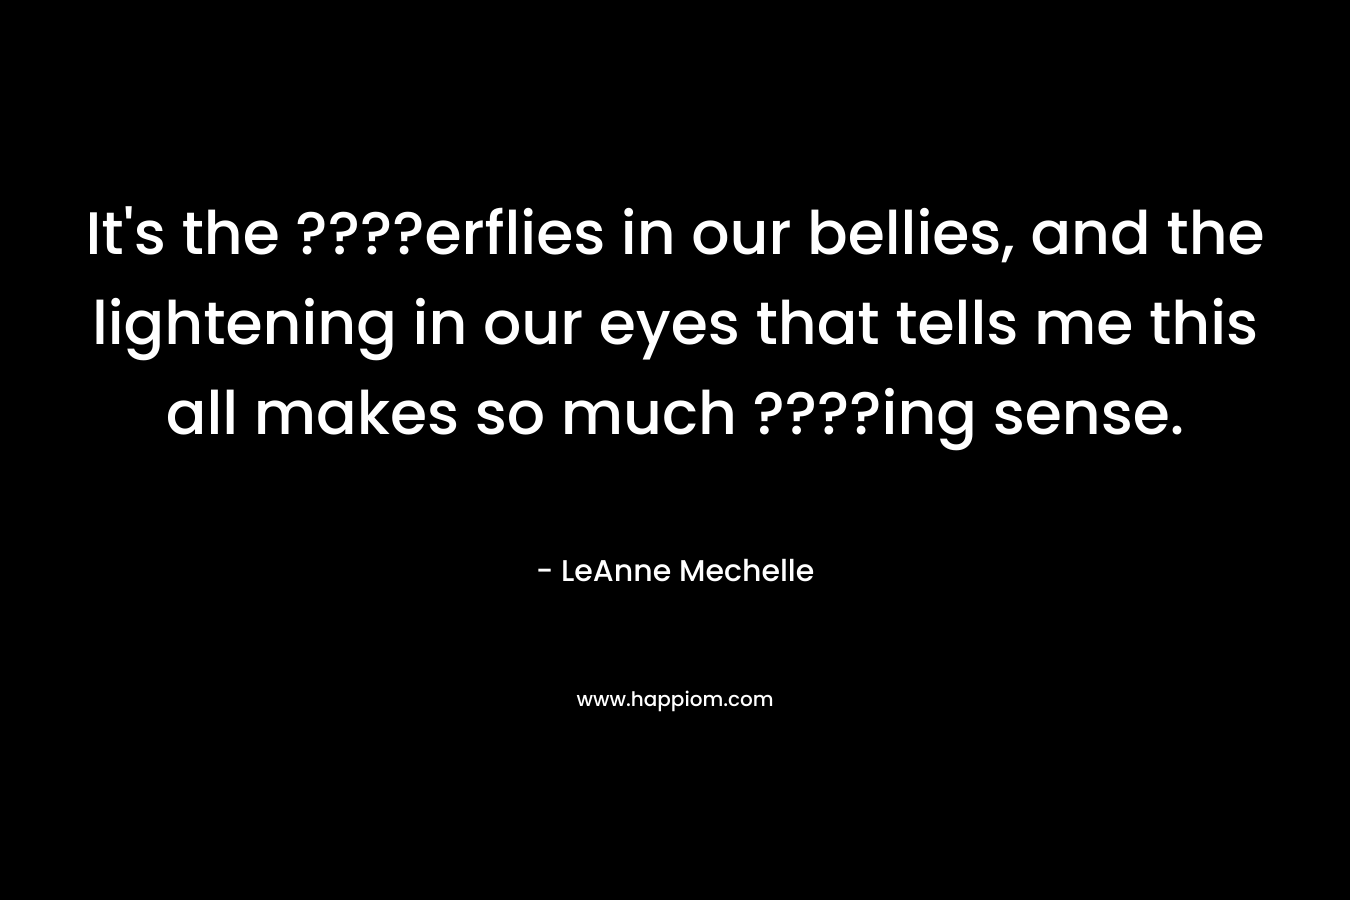 It’s the ????erflies in our bellies, and the lightening in our eyes that tells me this all makes so much ????ing sense. – LeAnne Mechelle